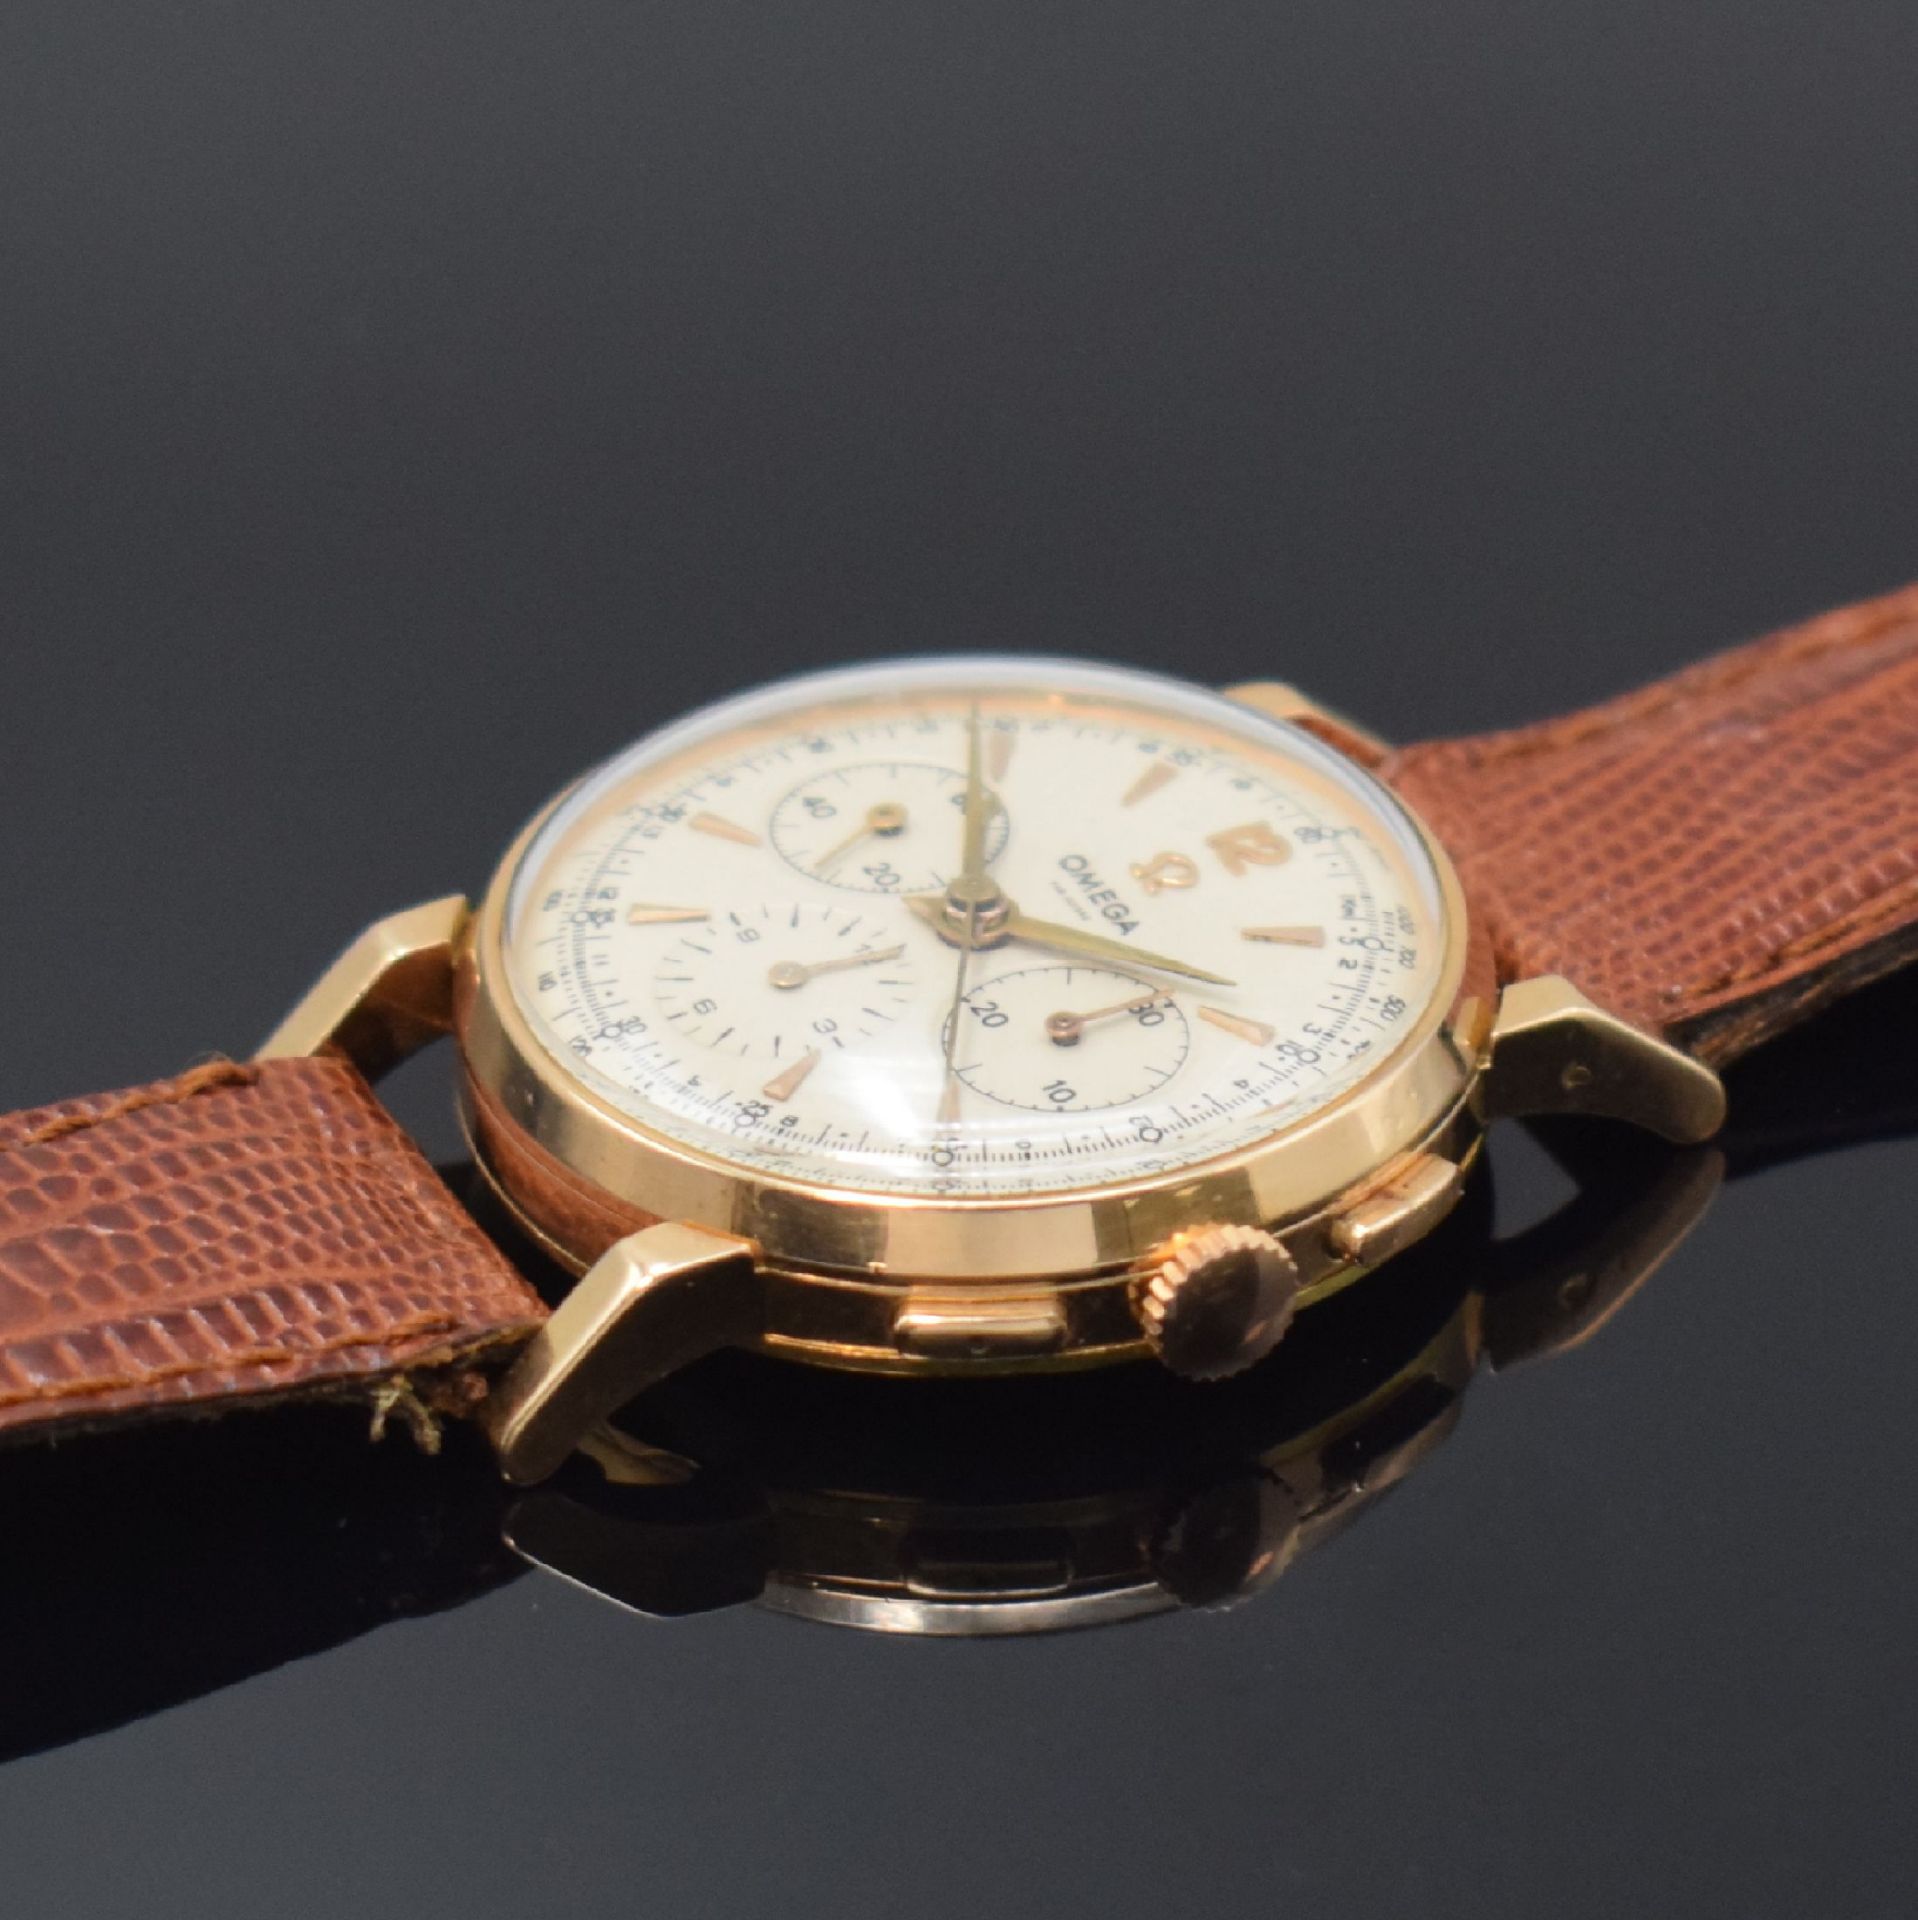 OMEGA Armbandchronograph mit Schaltrad in RG 750/000, - Image 3 of 6